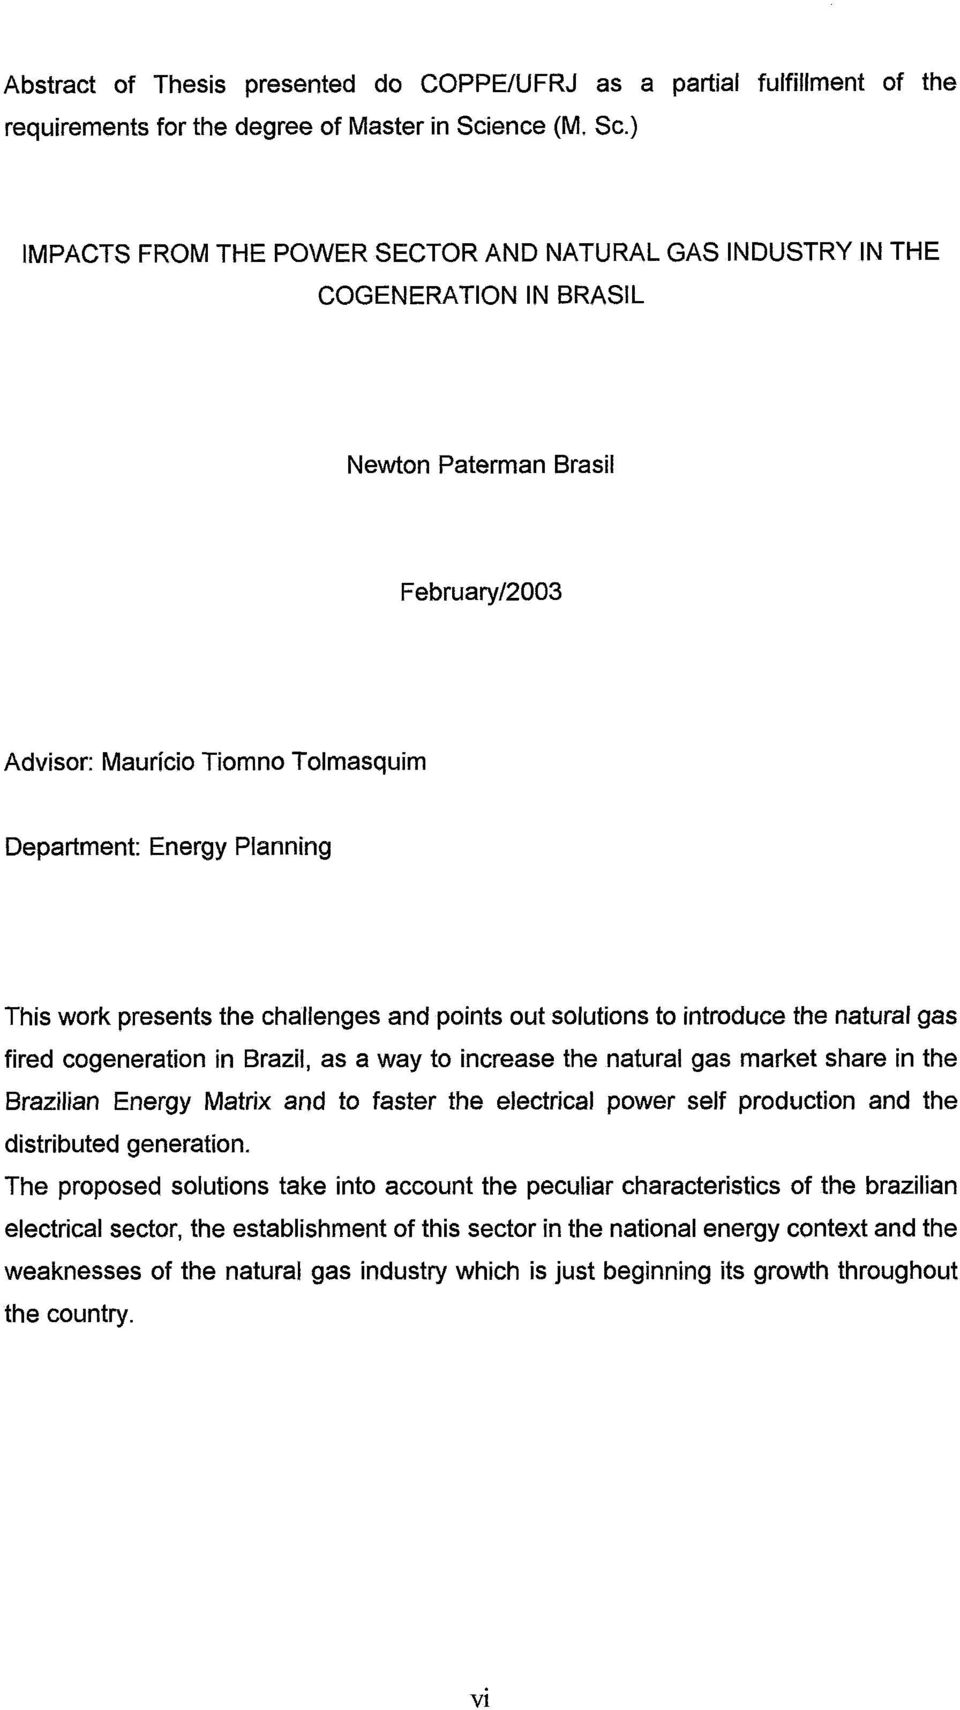 ) IMPACTS FROM THE POWER SECTOR AND NATURAL GAS INDUSTRY IN THE COGENERATION IN BRASIL Newton Paterman Brasil Februaryl2003 Advisor: Maurício Tiomno Tolmasquim Department: Energy Plcinning This work